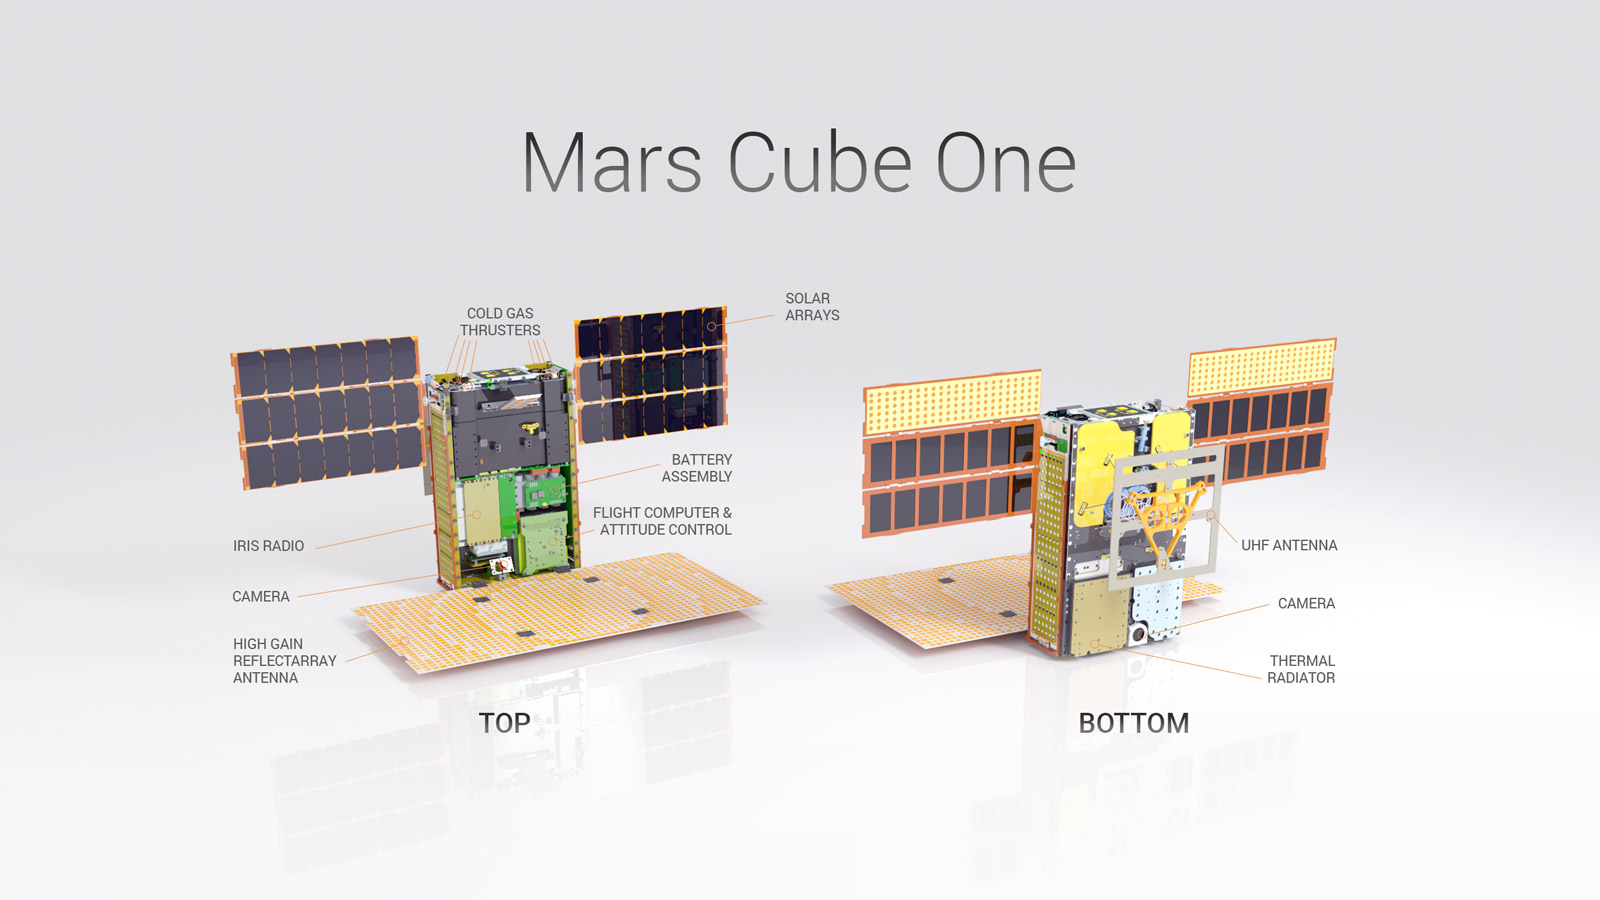 Mars Cube One in Detail